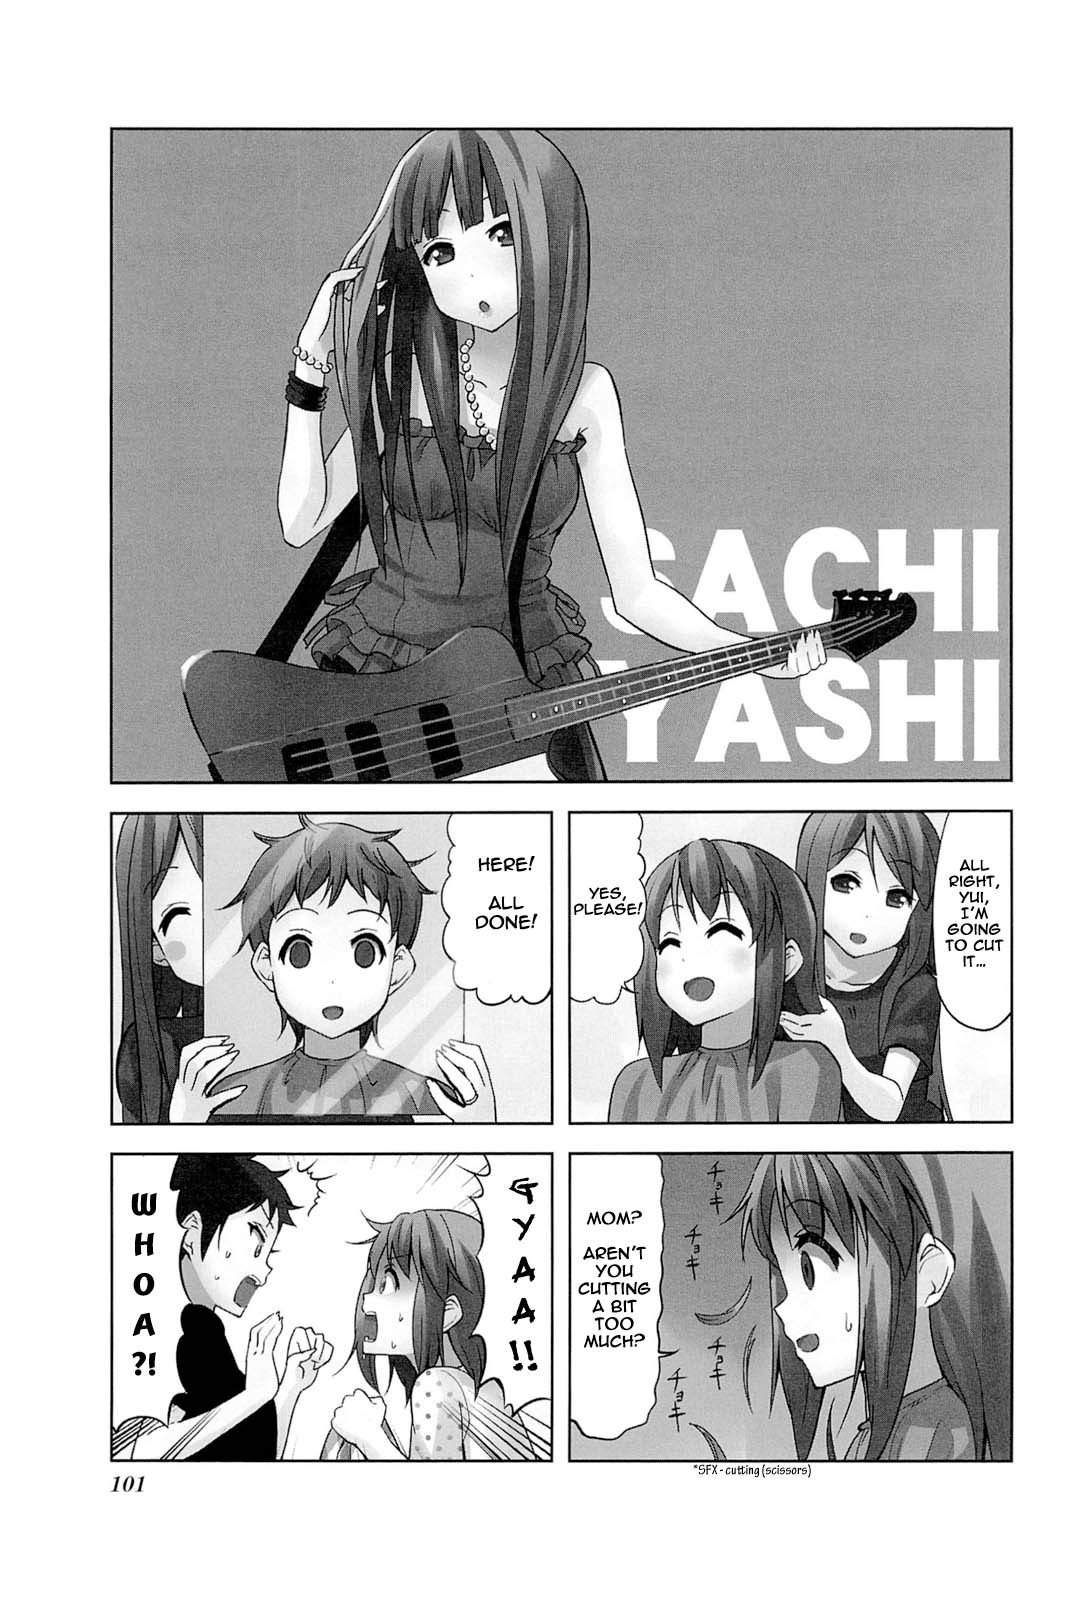 K-On! College - Page 1